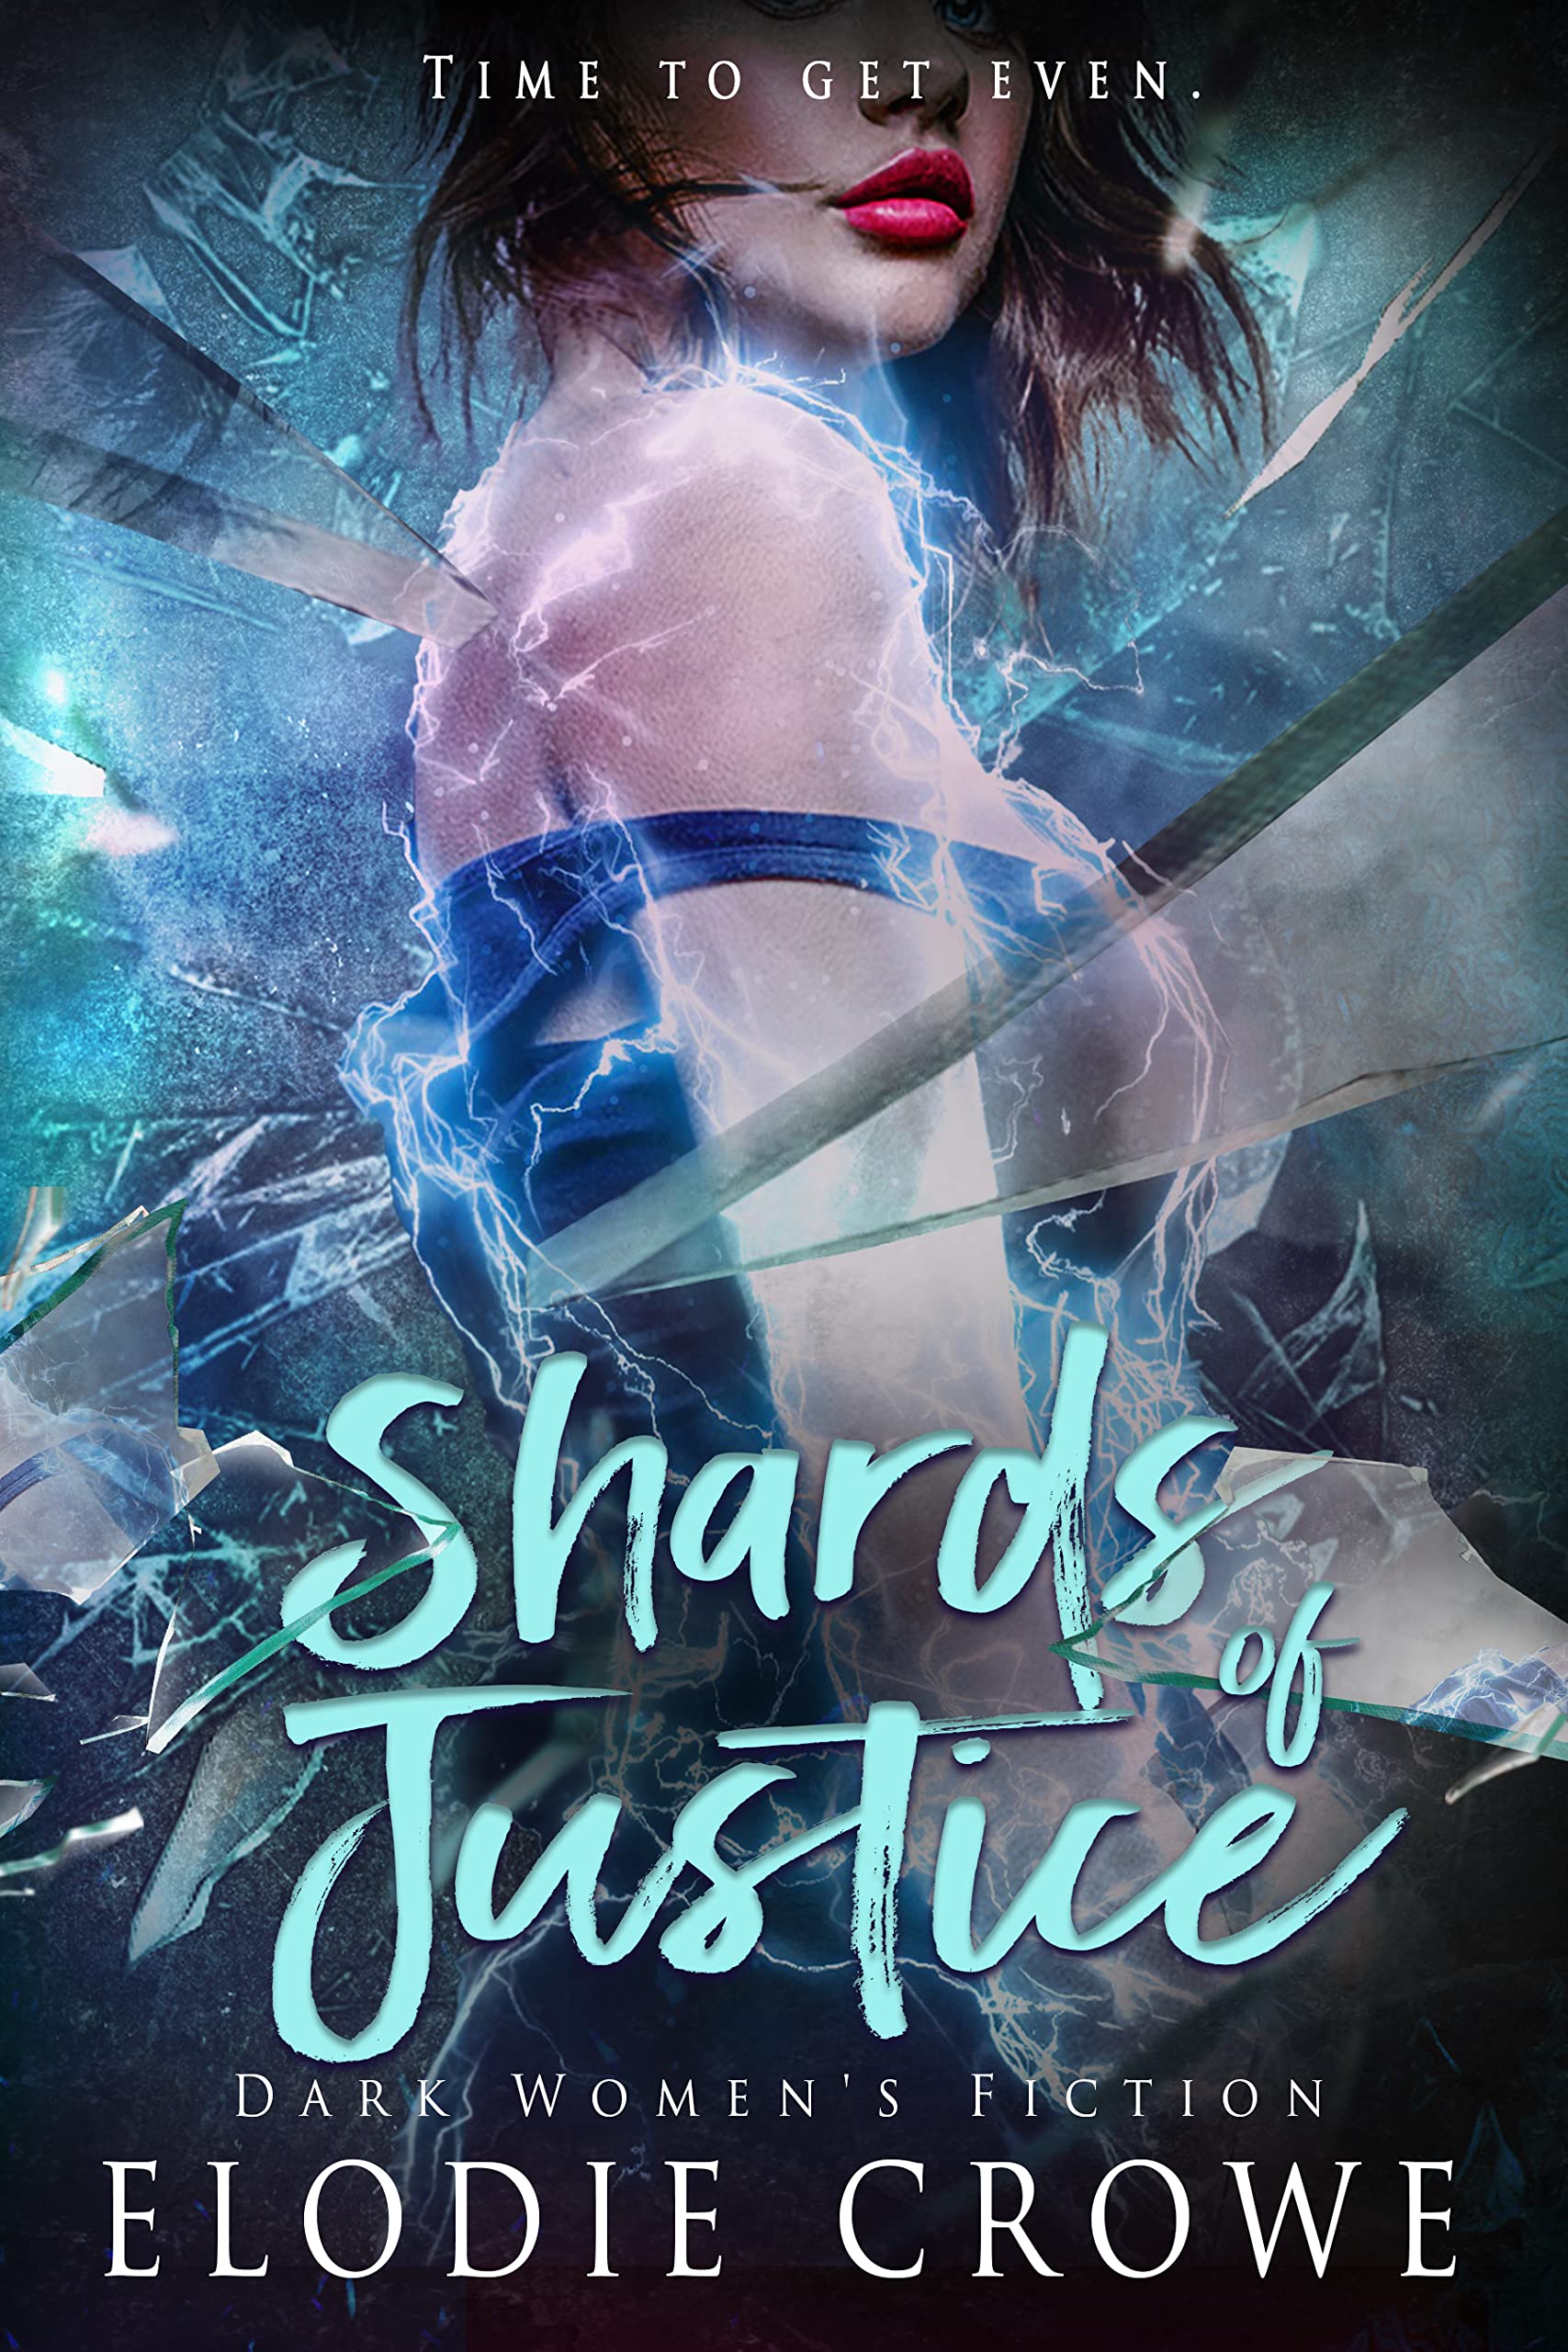 Shards of Justice